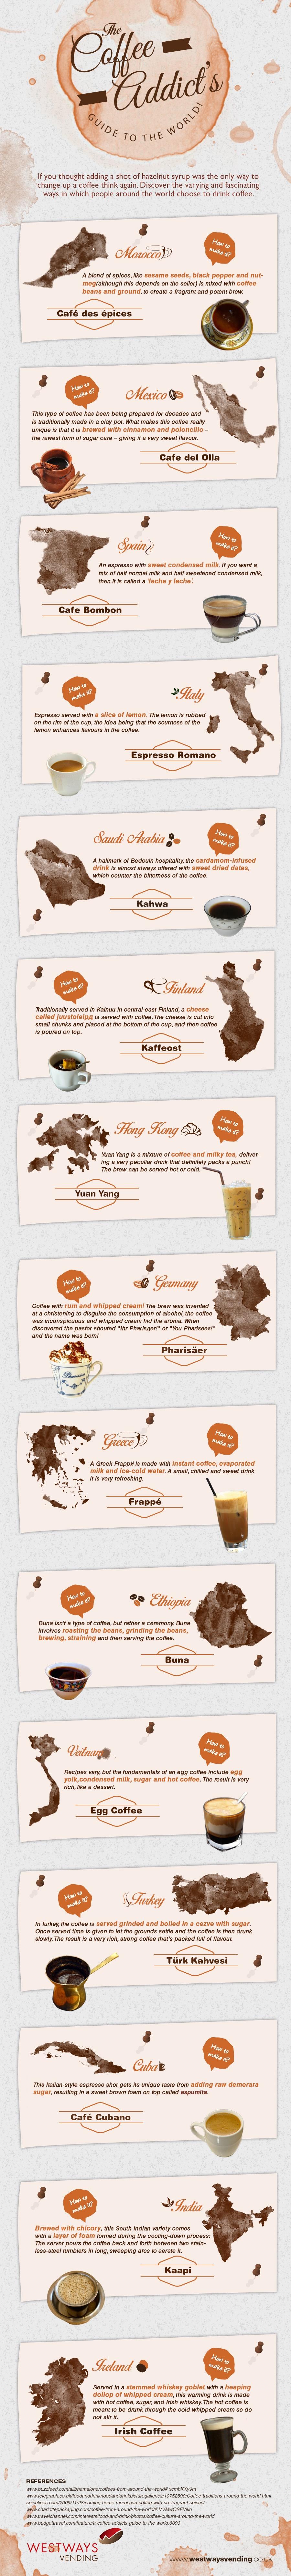 Coffees-of-the-World-Infographic